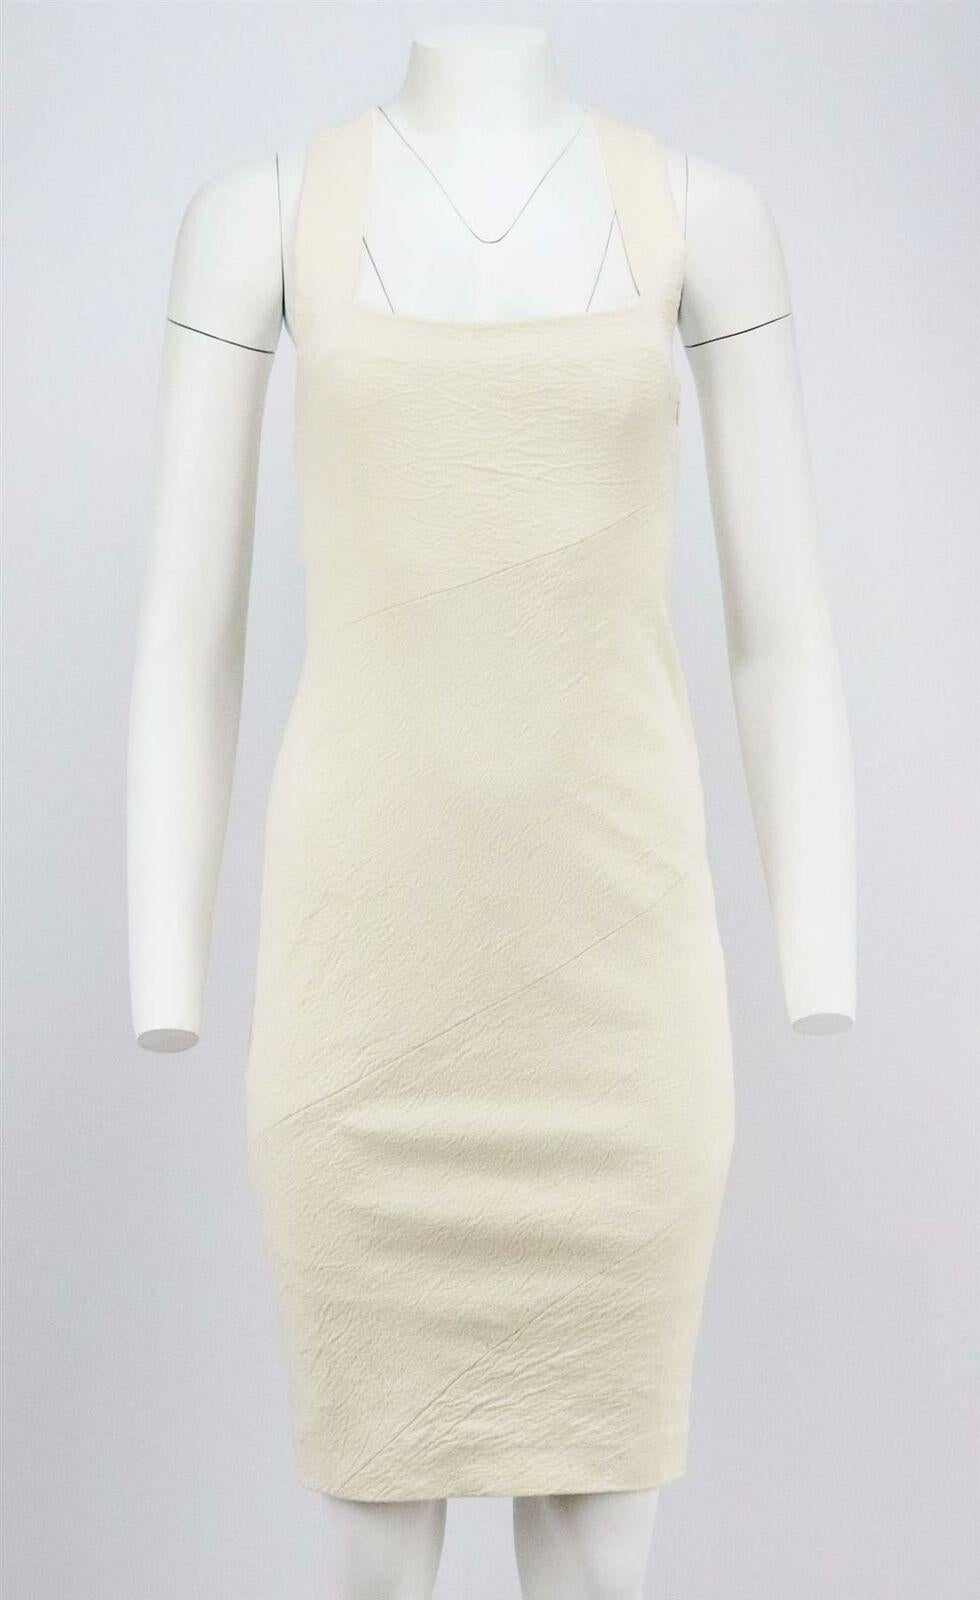 This dress by Donna Karan New York is made from stretch linen-blend - it fits closely to the body and is designed for a bodycon fit that fall just above the knee and has a cross-over back.
Cream linen-blend.
Concealed zip fastening at side.
64%